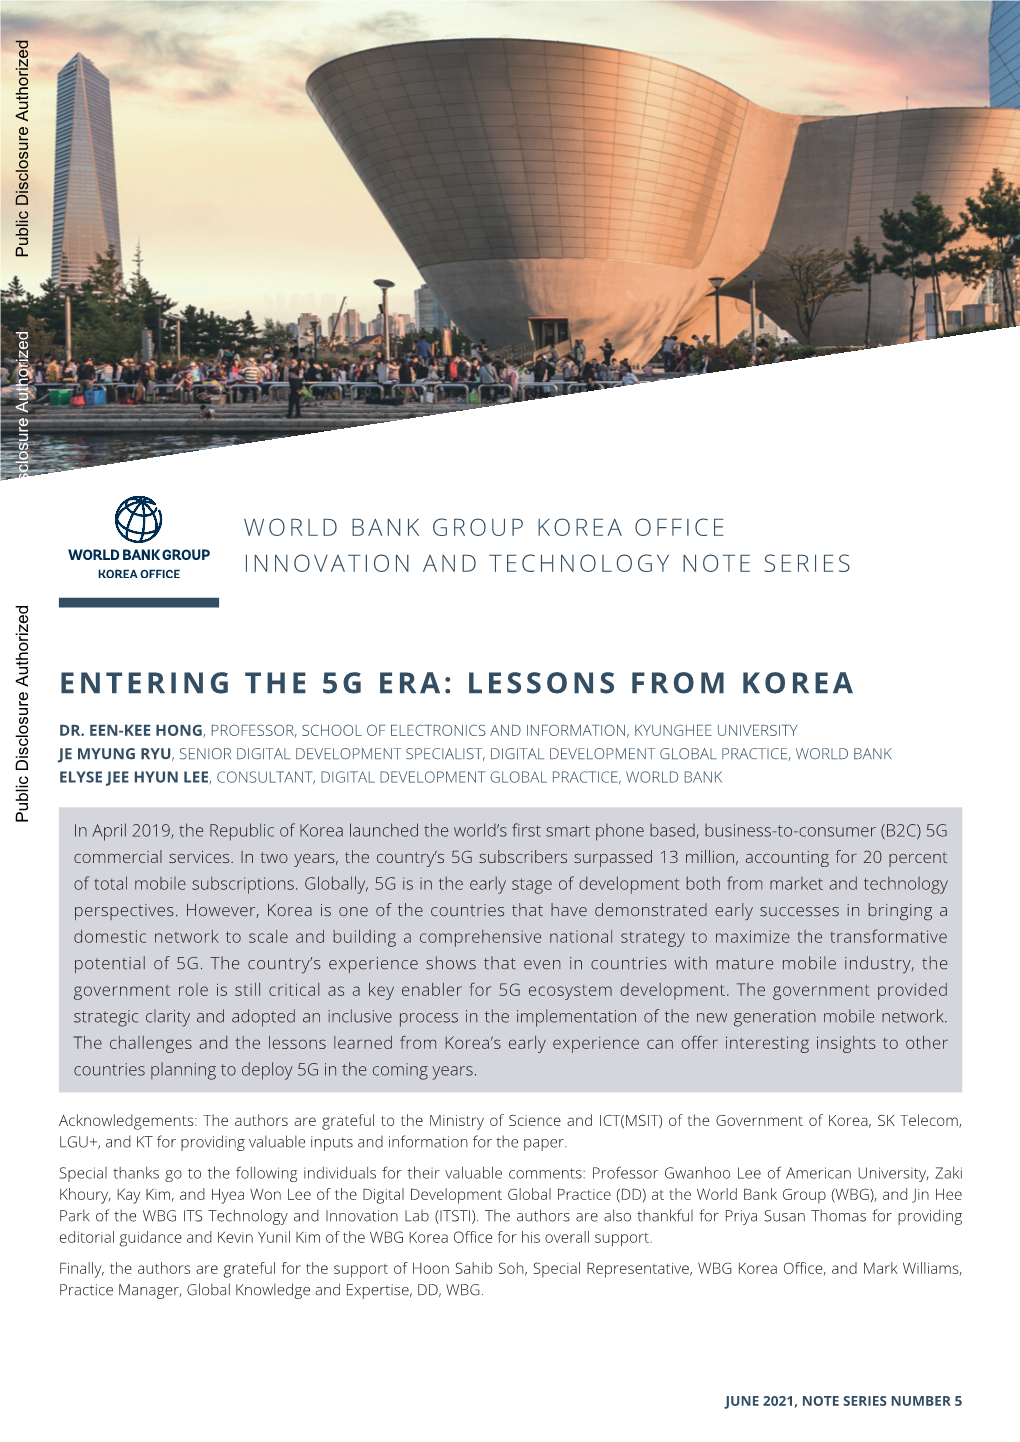 World Bank Group Korea Office Innovation and Technology Note Series